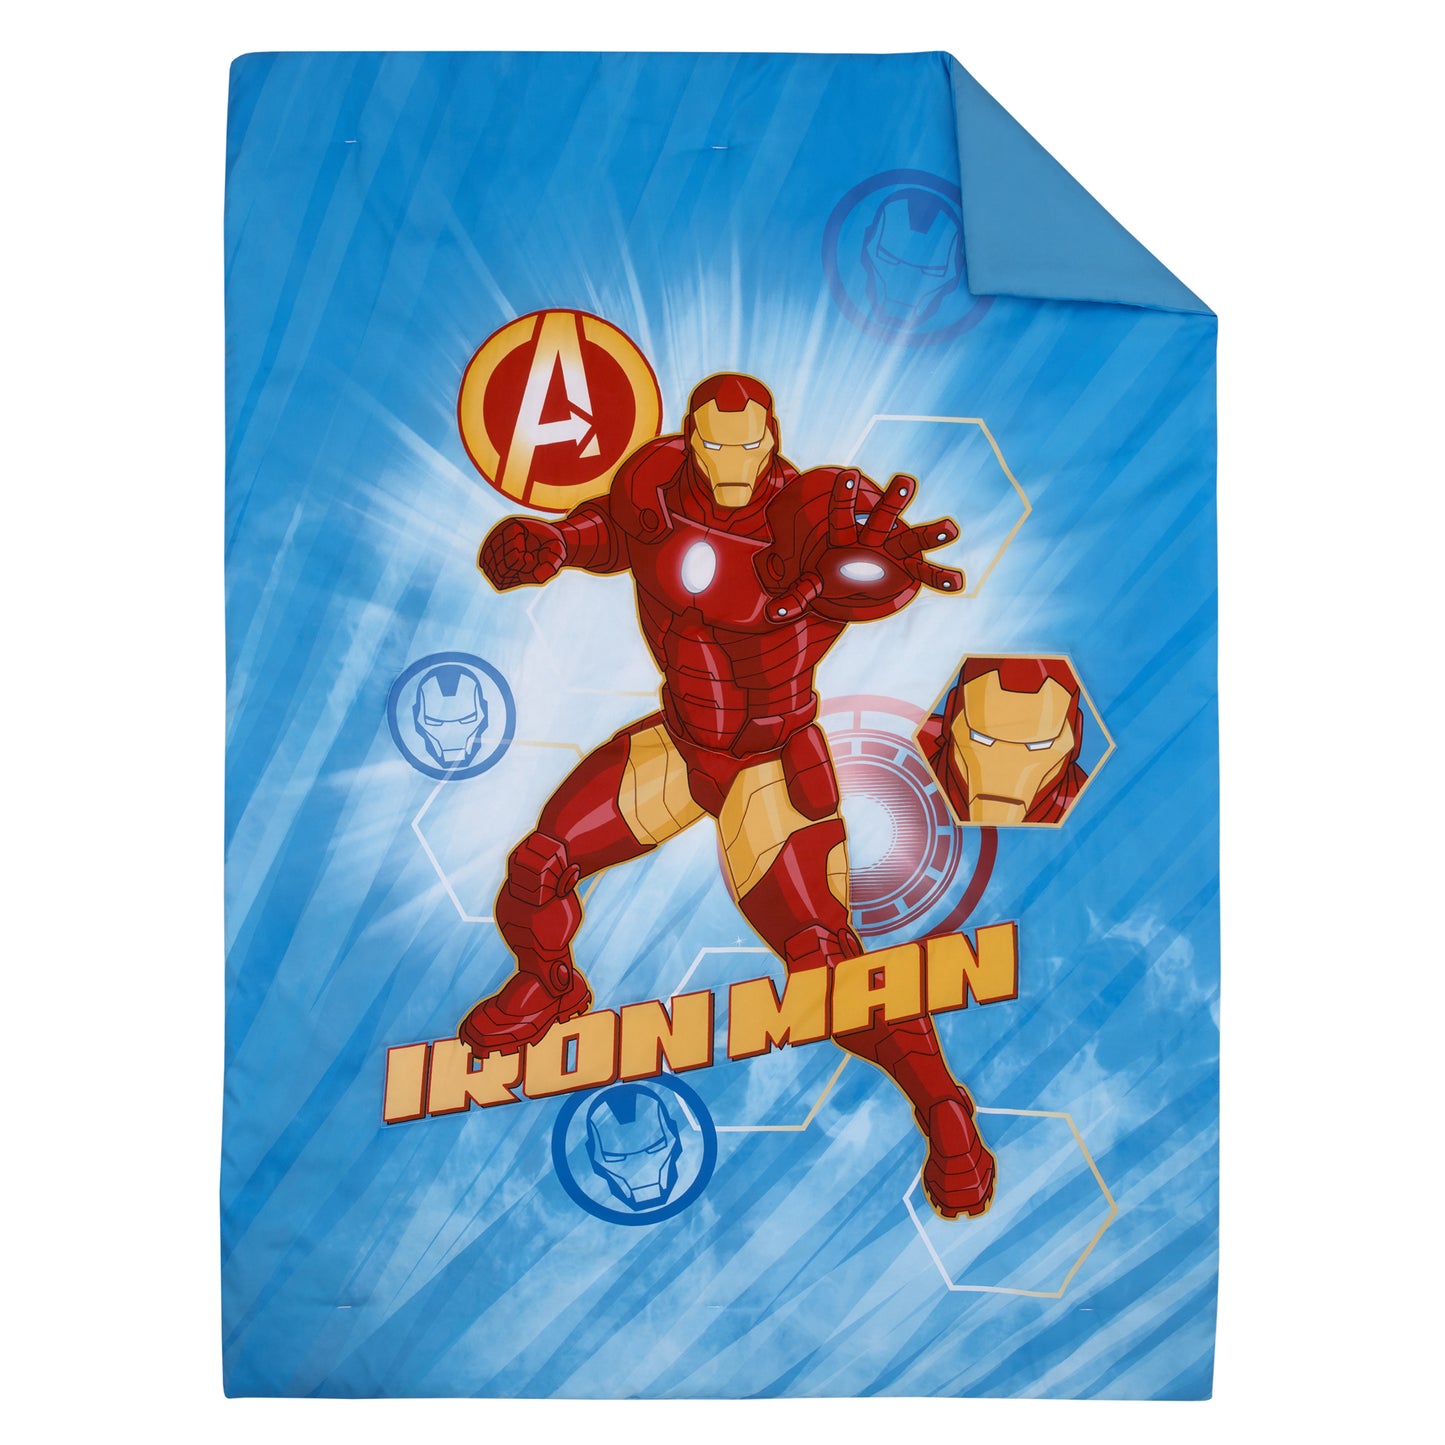 Marvel Avengers - Iron Man Blue, Red, and Gold 4 Piece Toddler Bedding Set - Comforter, Fitted Bottom Sheet, Flat Top Sheet and Reversible Pillowcase